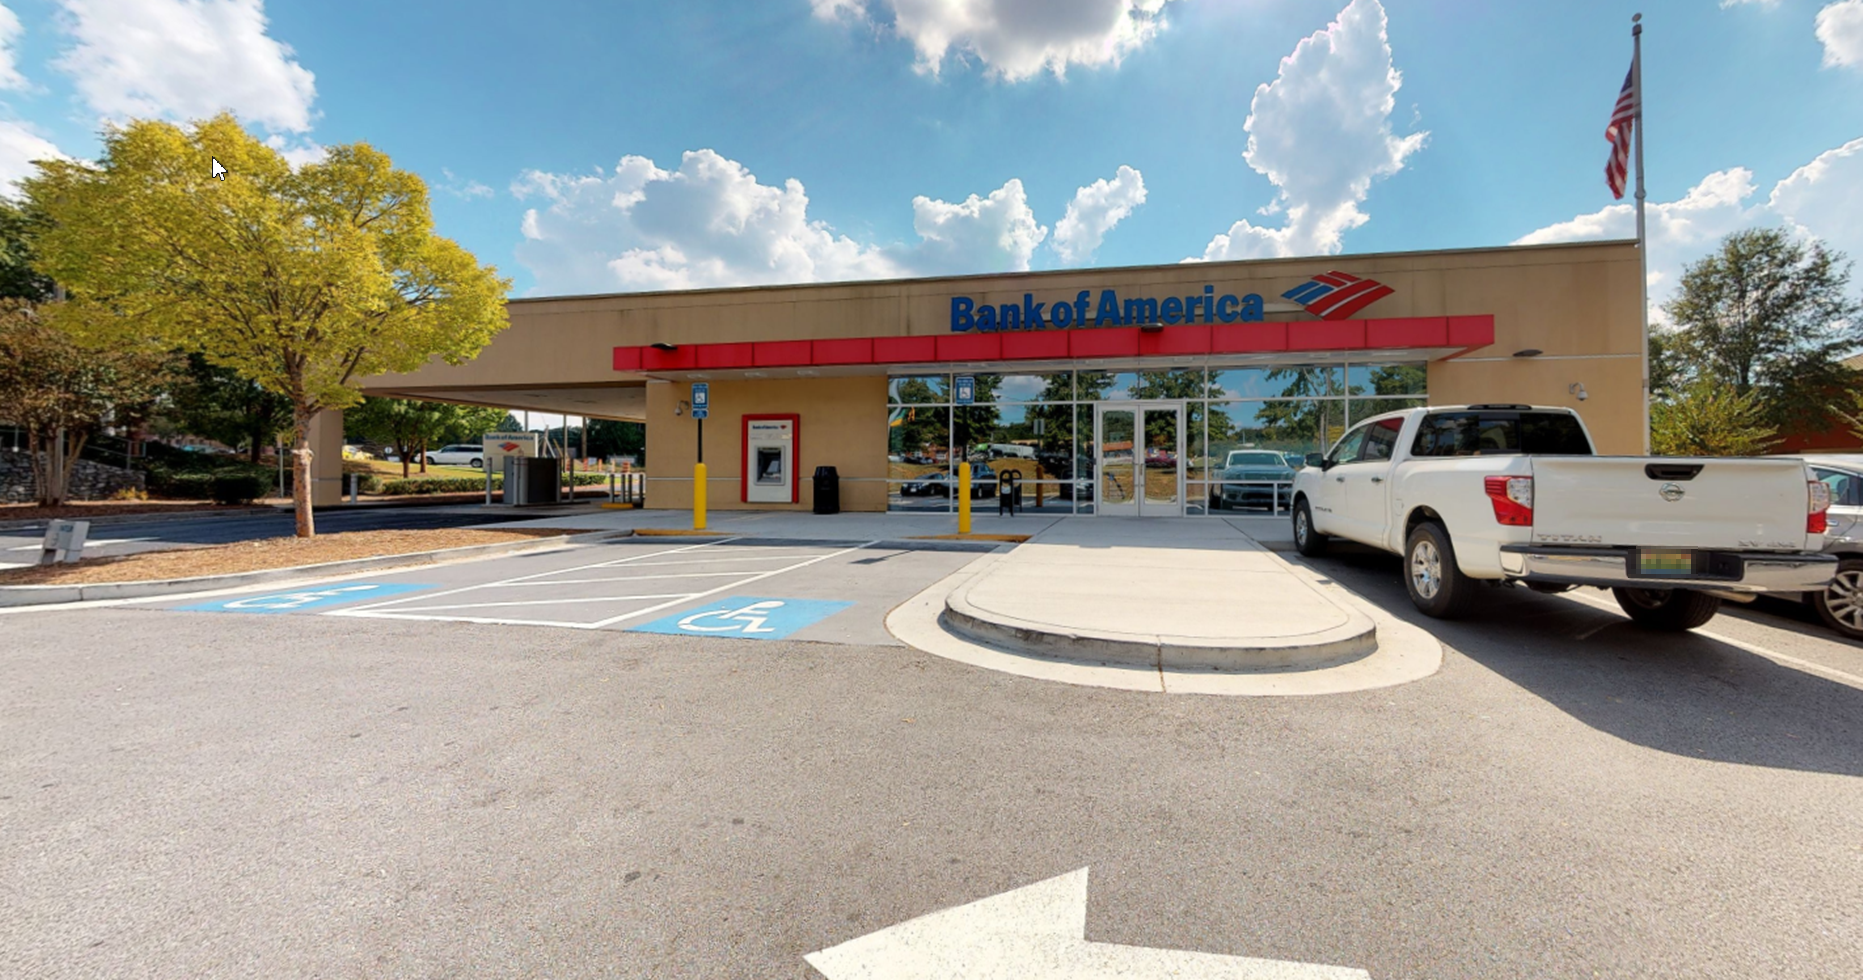 Bank of America financial center with drive-thru ATM and teller | 2781 Cobb Pkwy NW, Kennesaw, GA 30152